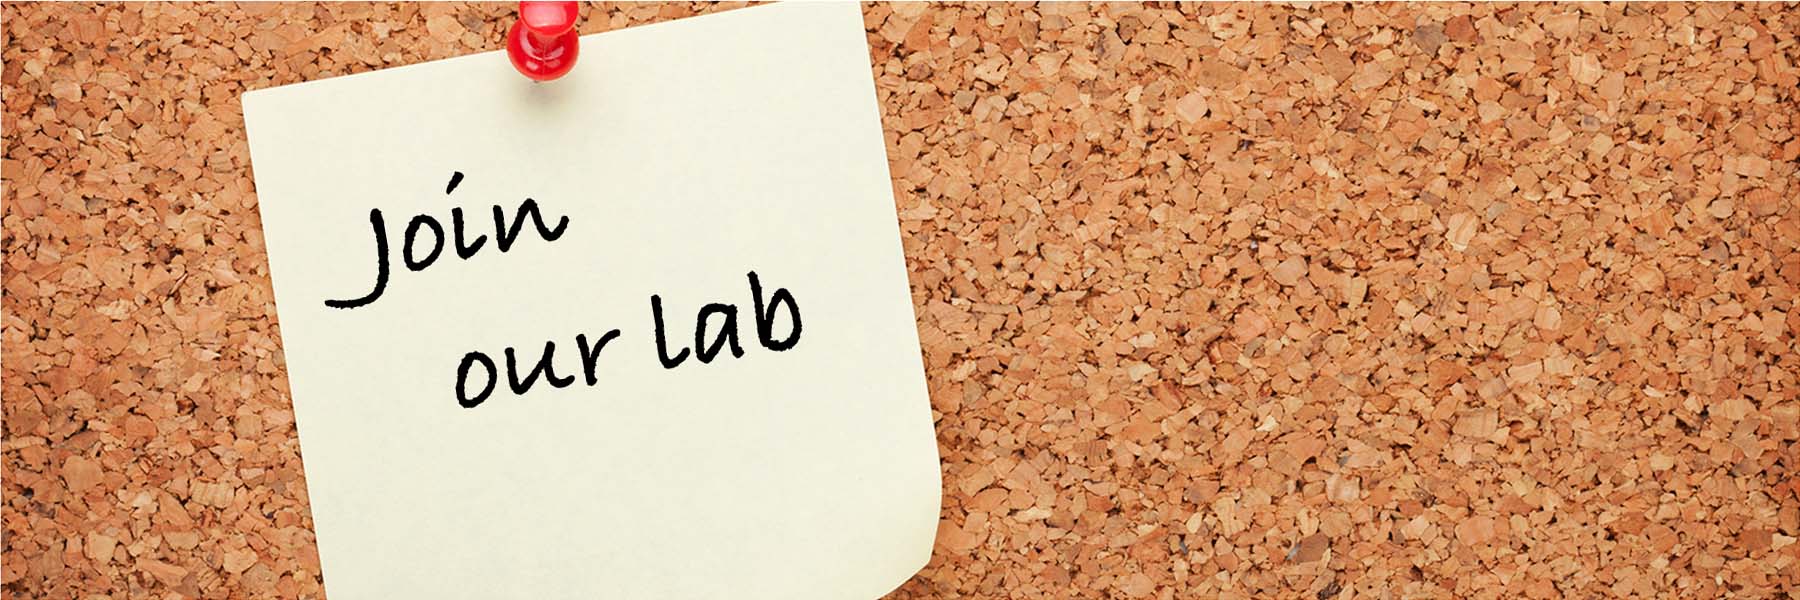 'Join our lab' is written on a post-it note pinned to a cork board.